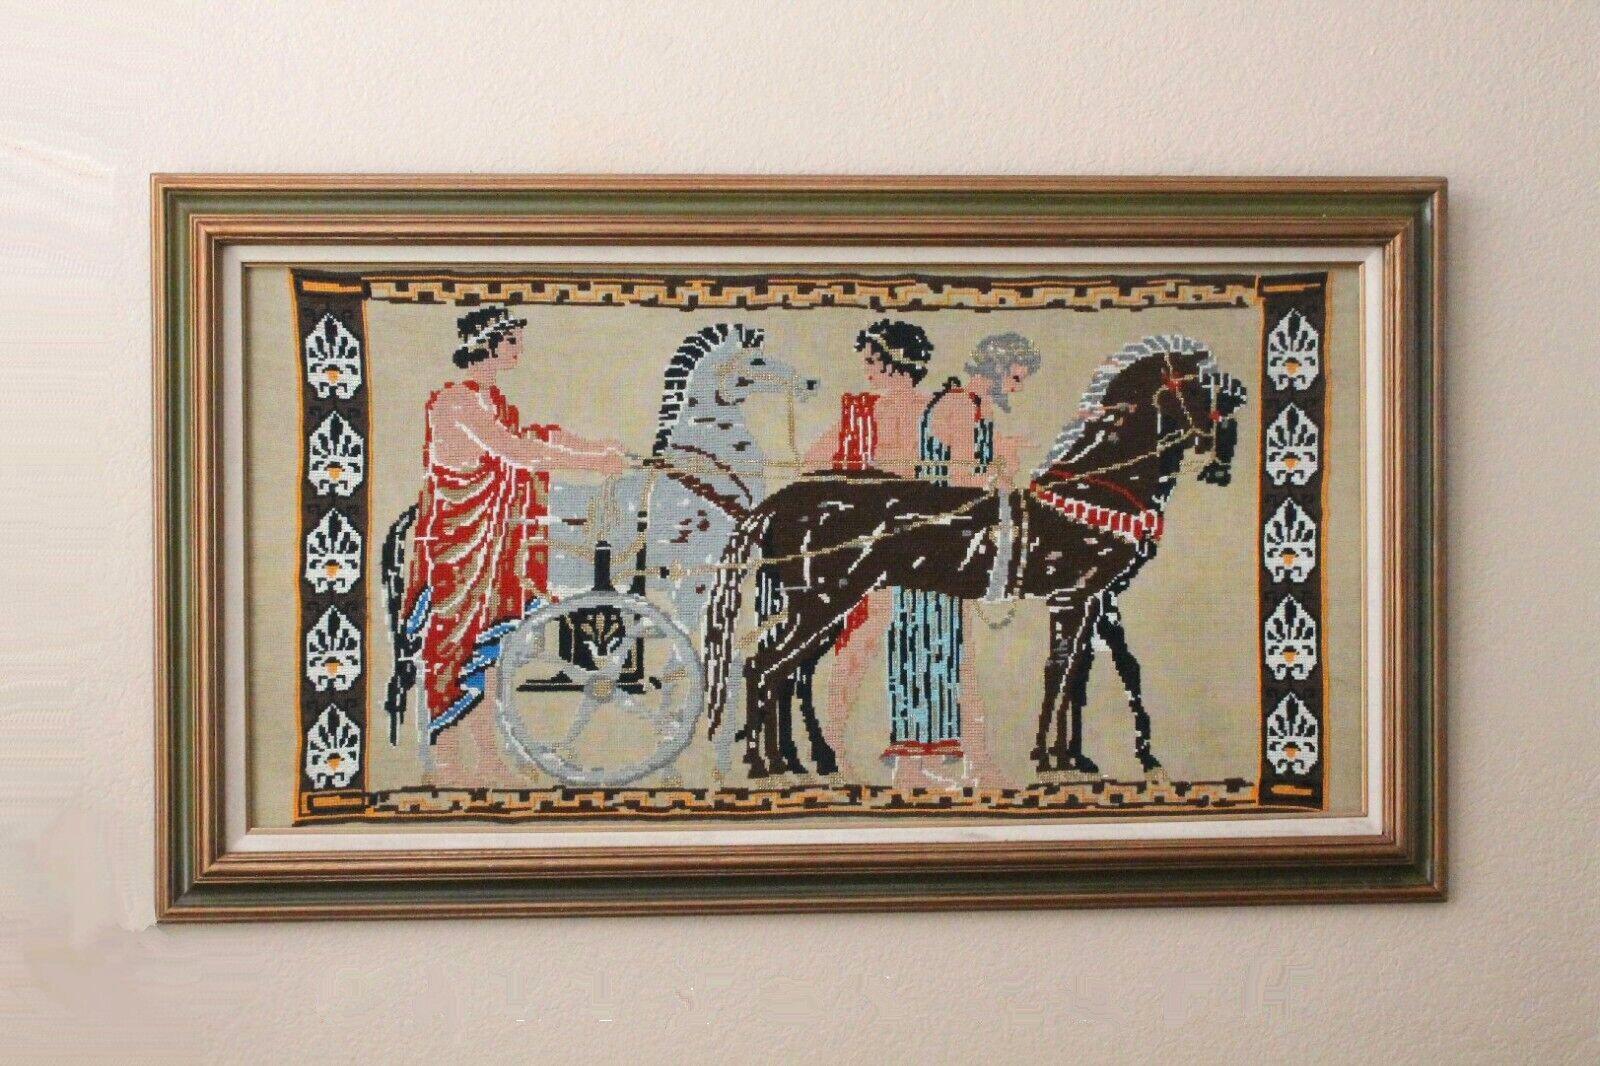 Fabric COLOSSAL! MCM Greek Revival Tapestry! 1950s Frederic Weinberg Era Wall Art Decor For Sale